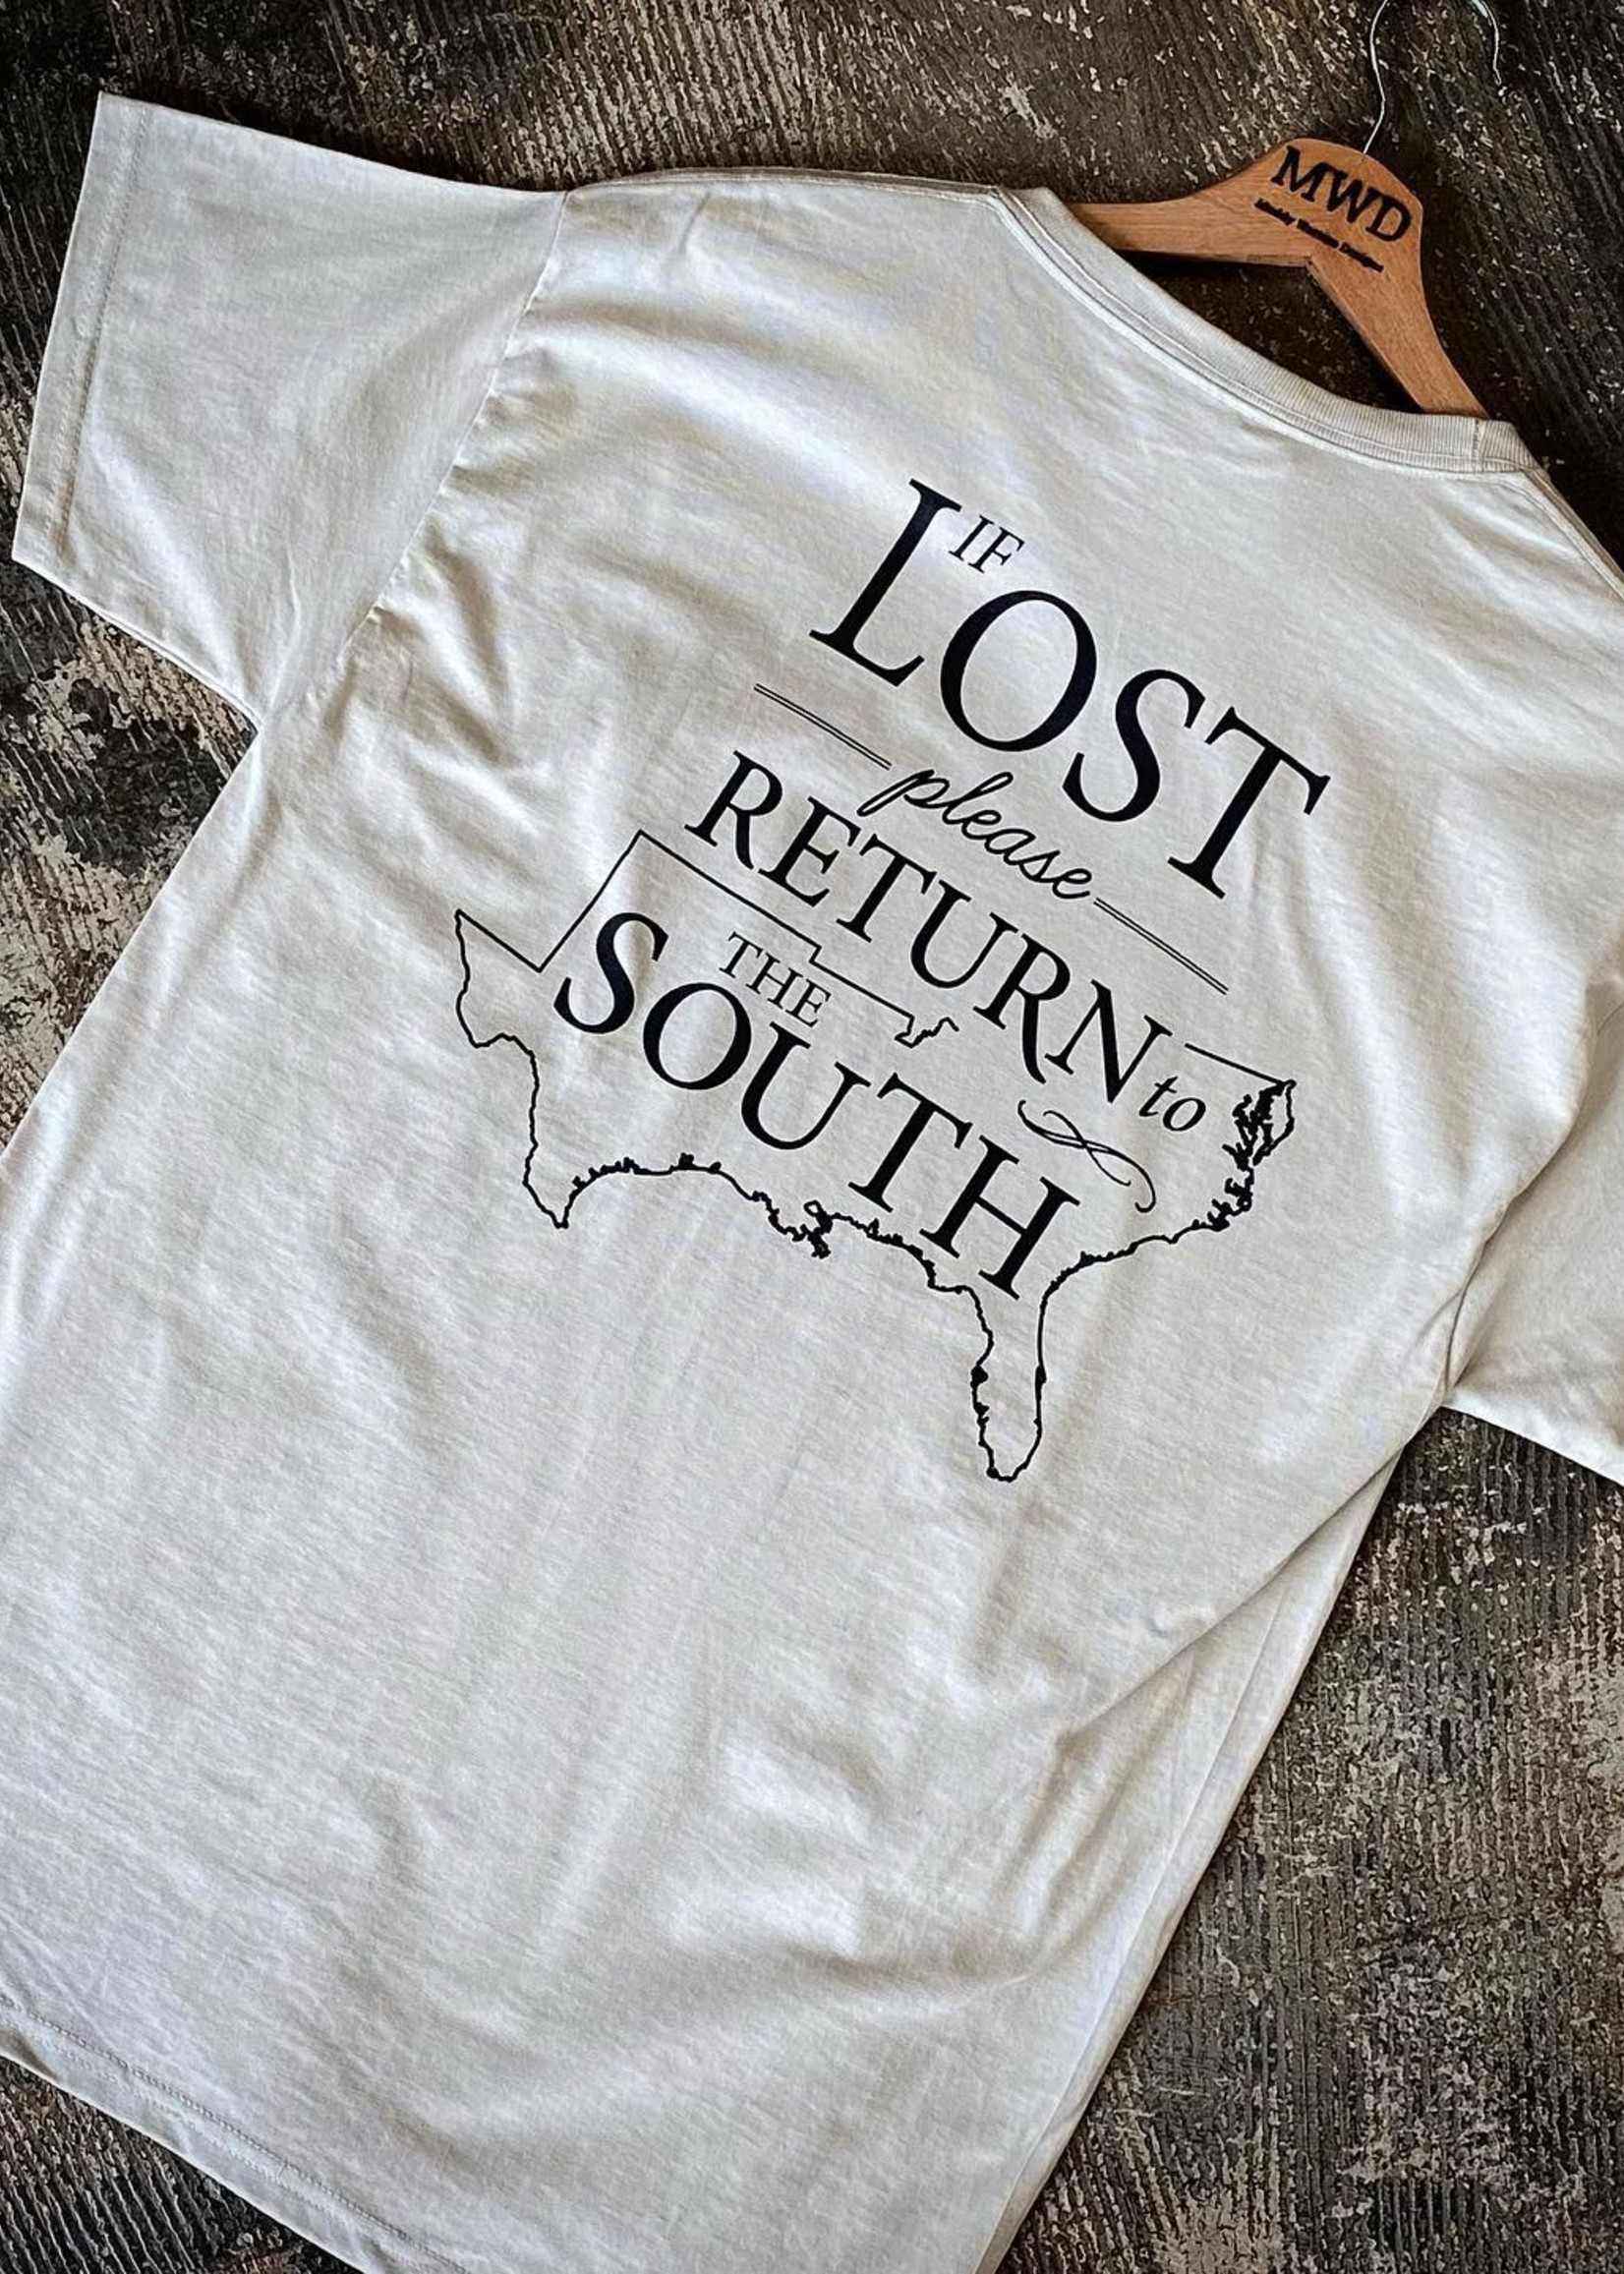 Old South Returned To The South  - Short Sleeve